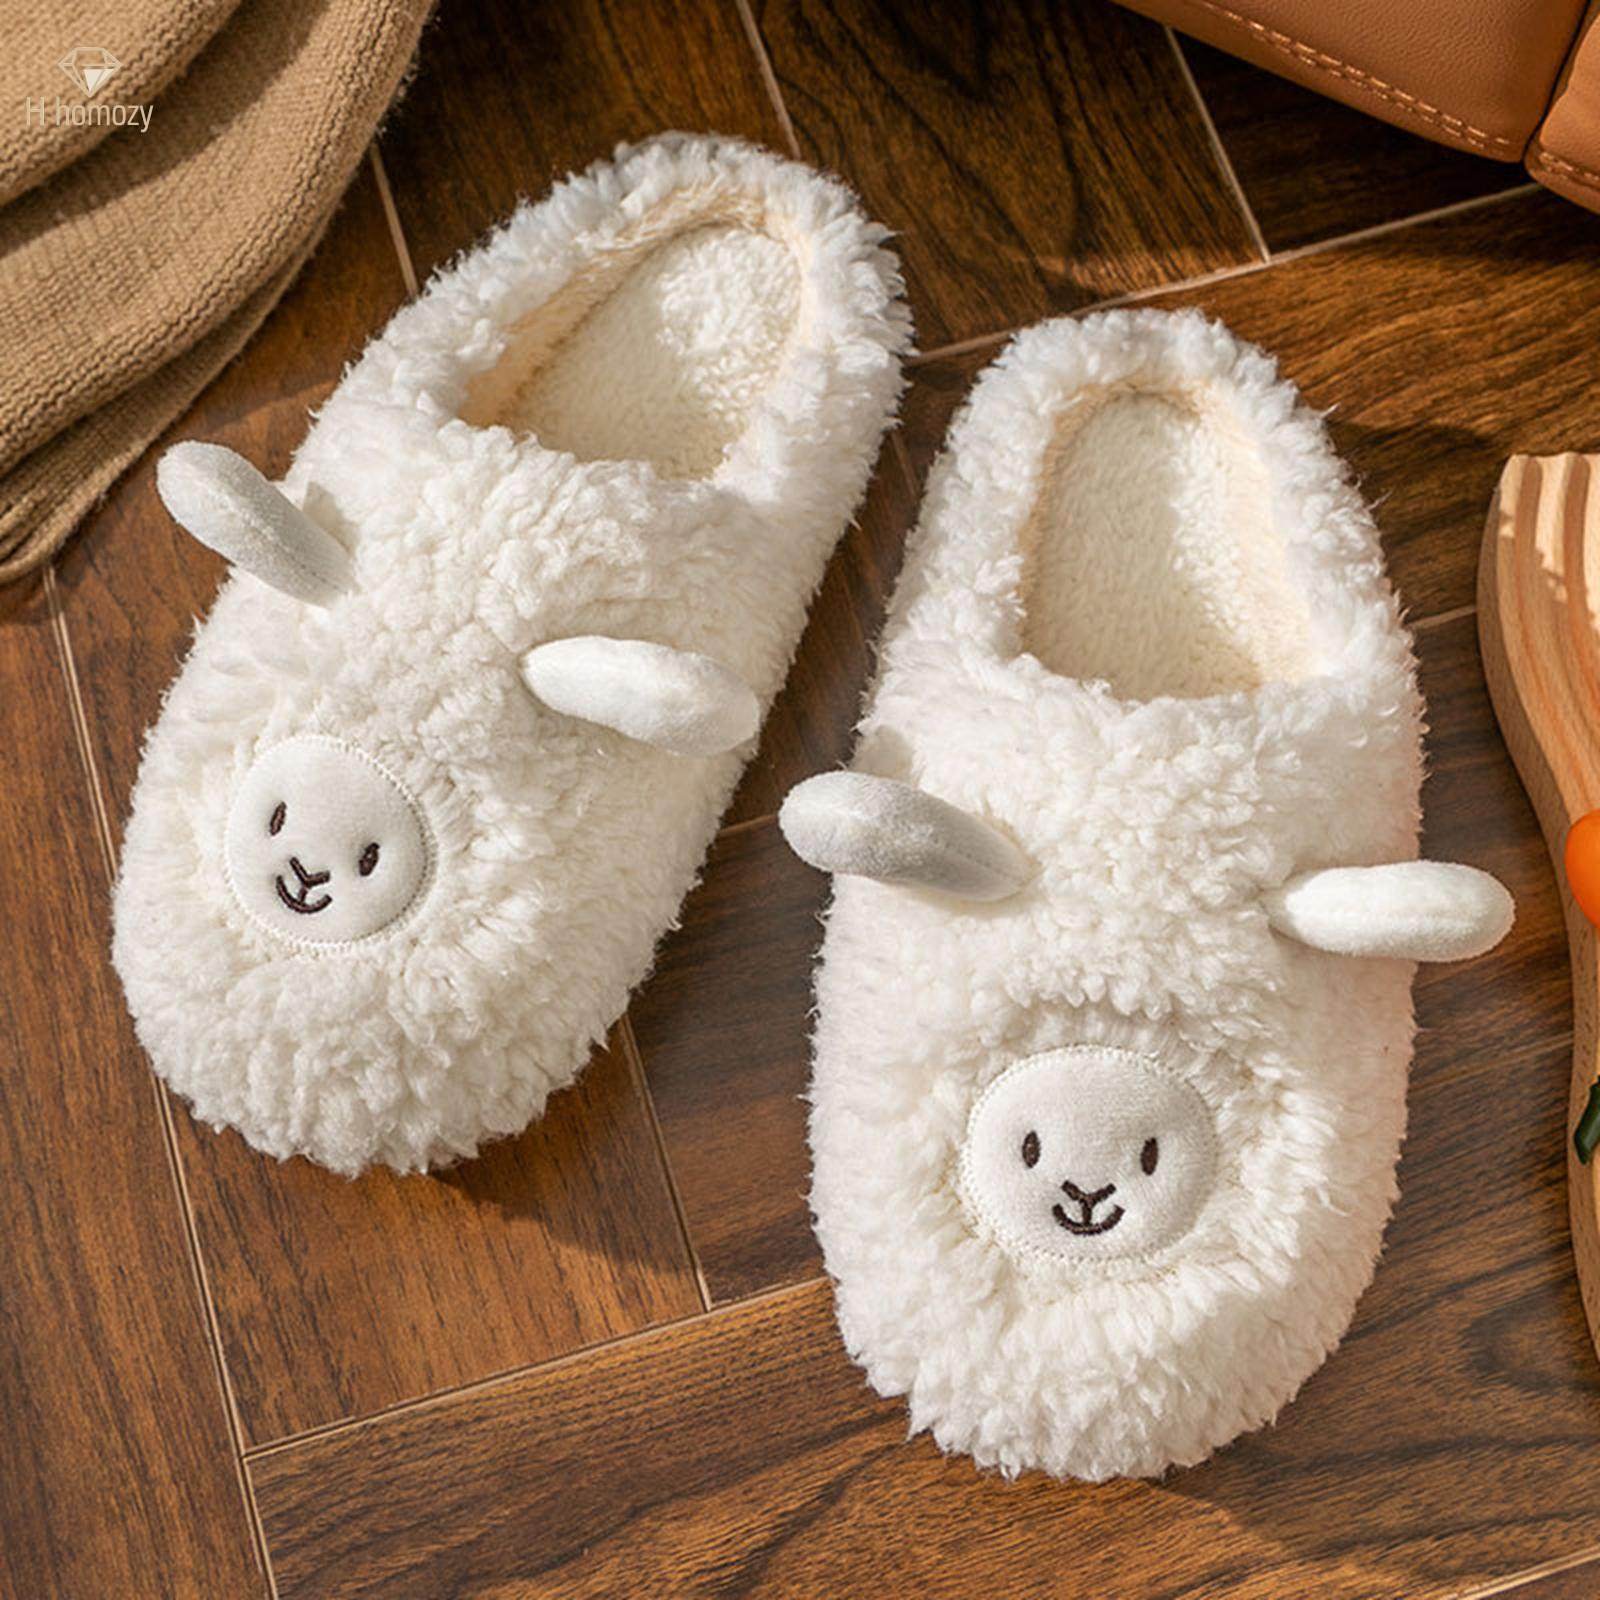 Fashion Winter Slippers Cute Home Shoes Plush Slipper Women House Slippers  Anti Slip, Soft Comfortable, for Travel Hotel Bedroom Costume SPA , 40-41